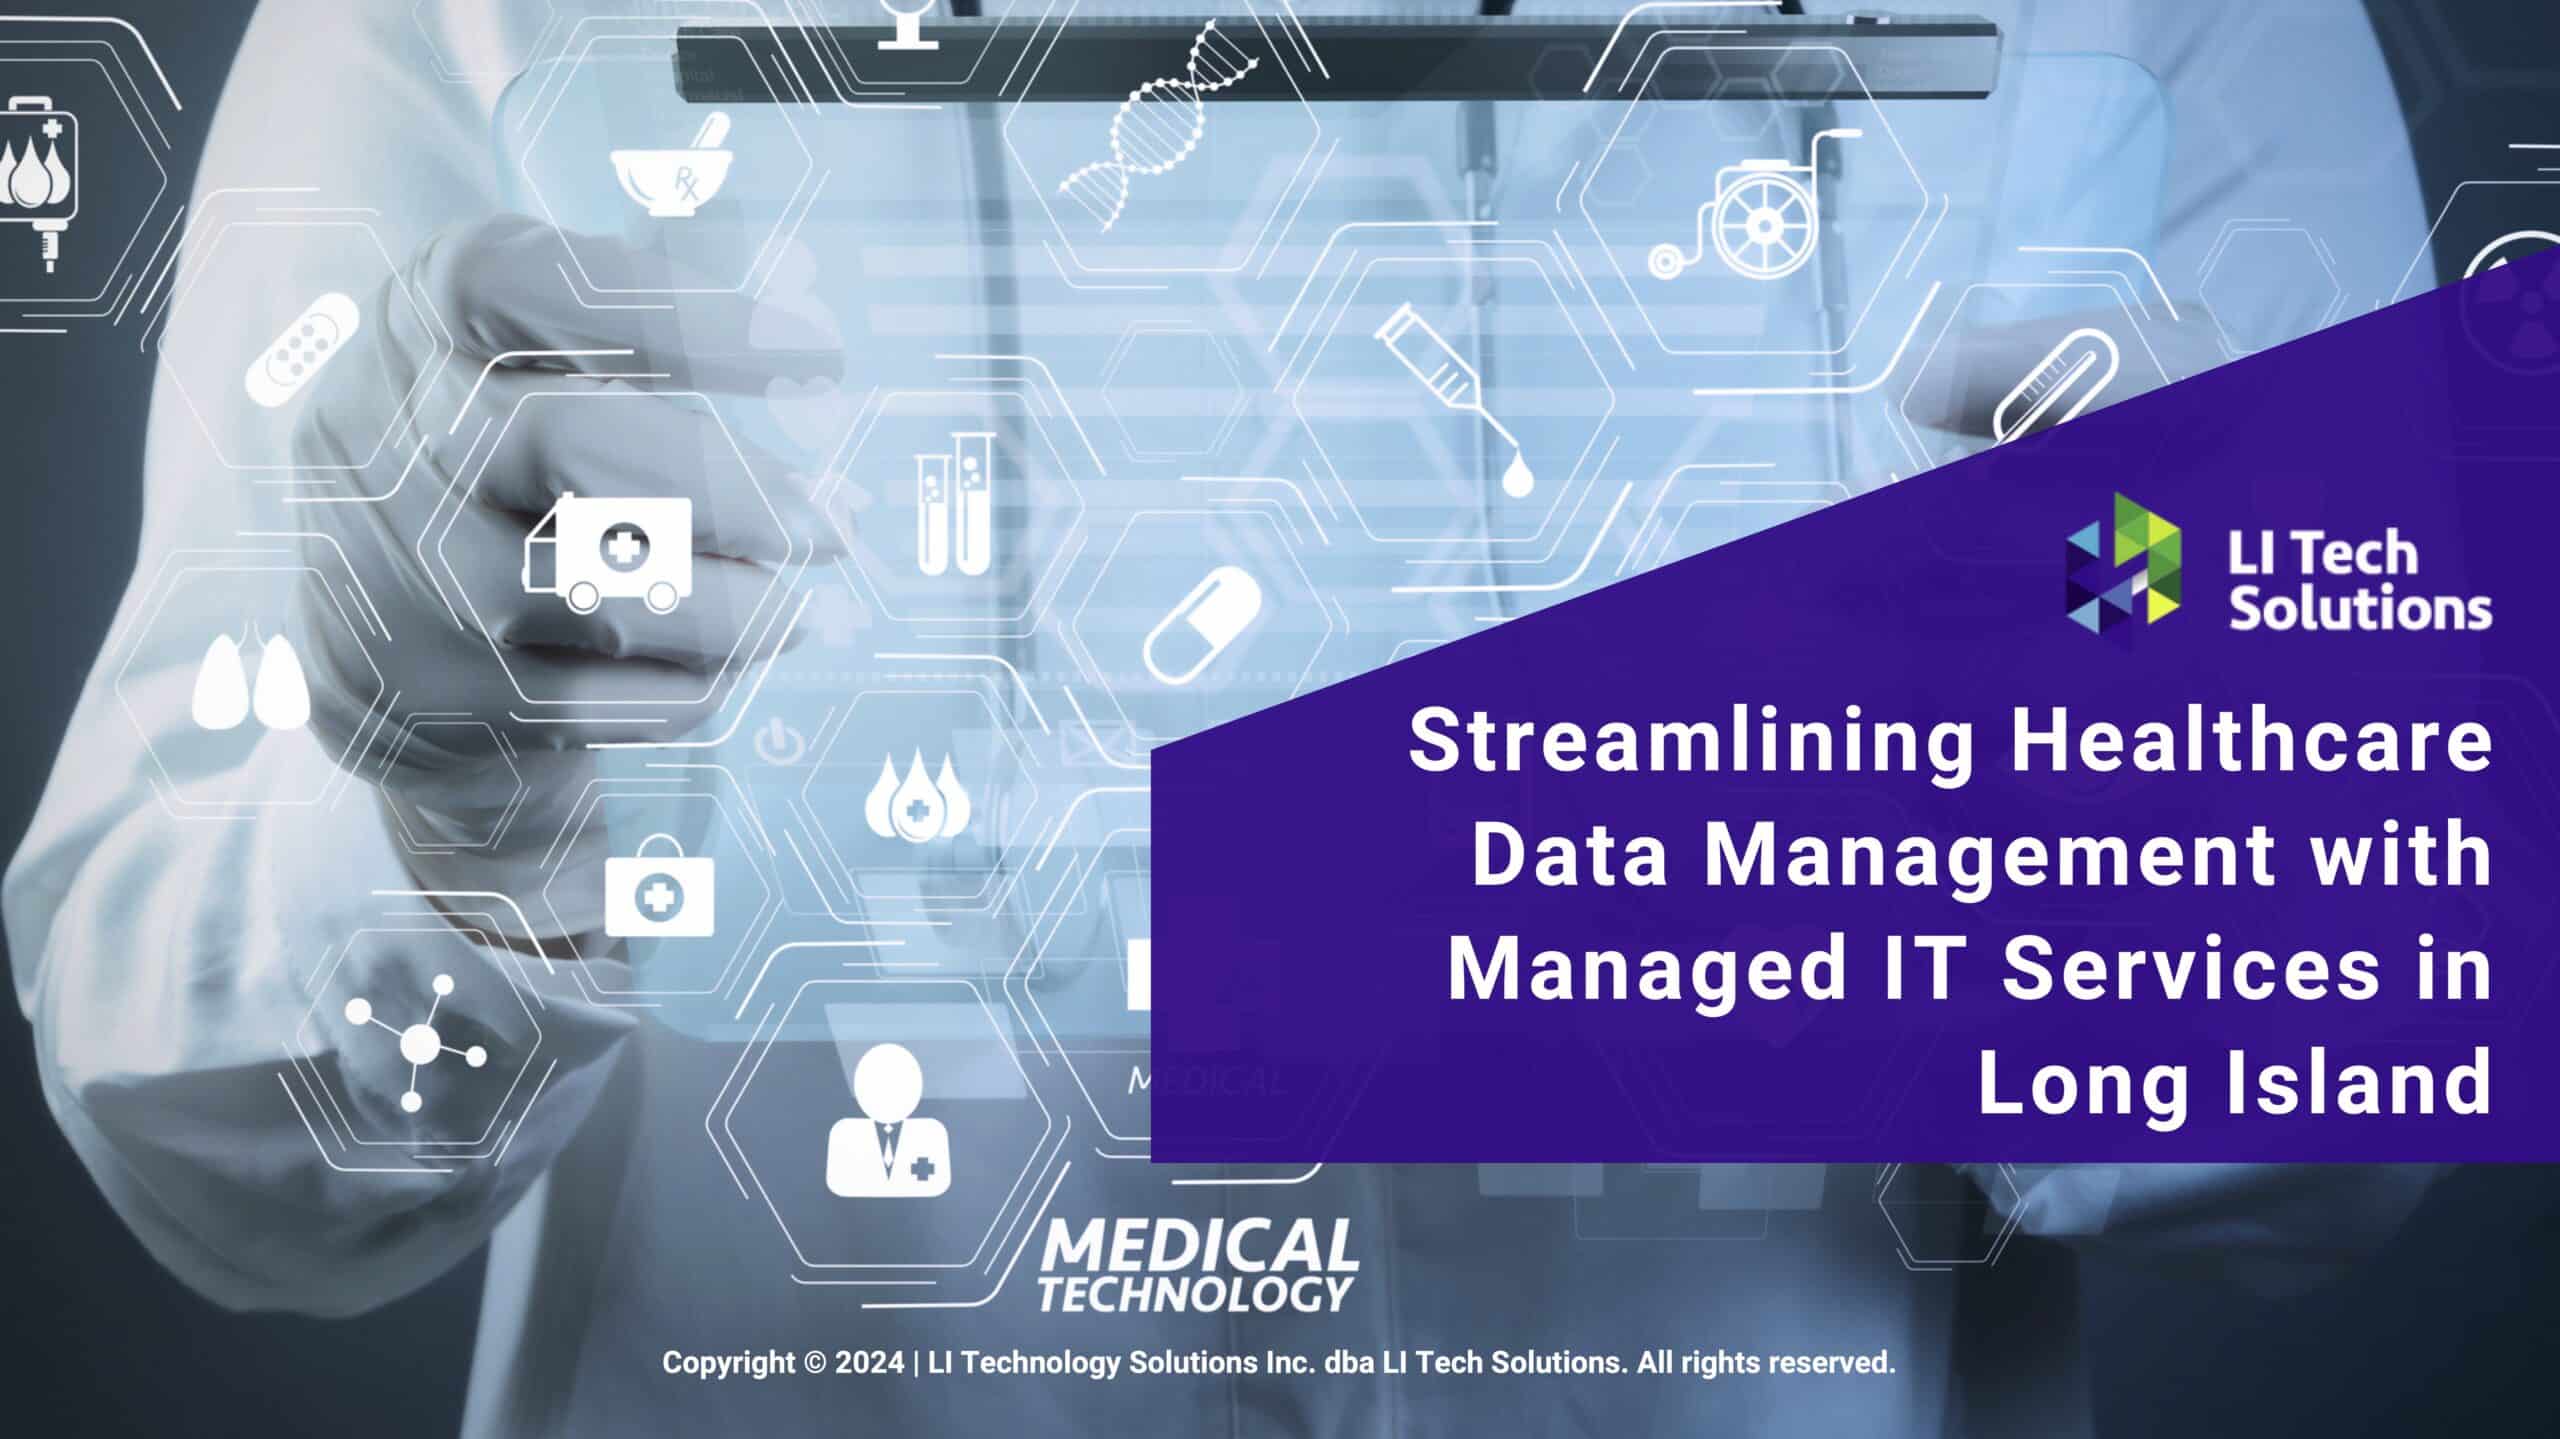 Featured: Modern VR with medical technology diagram- Streamlining Healthcare Data Management with Managed IT Services in Long Island